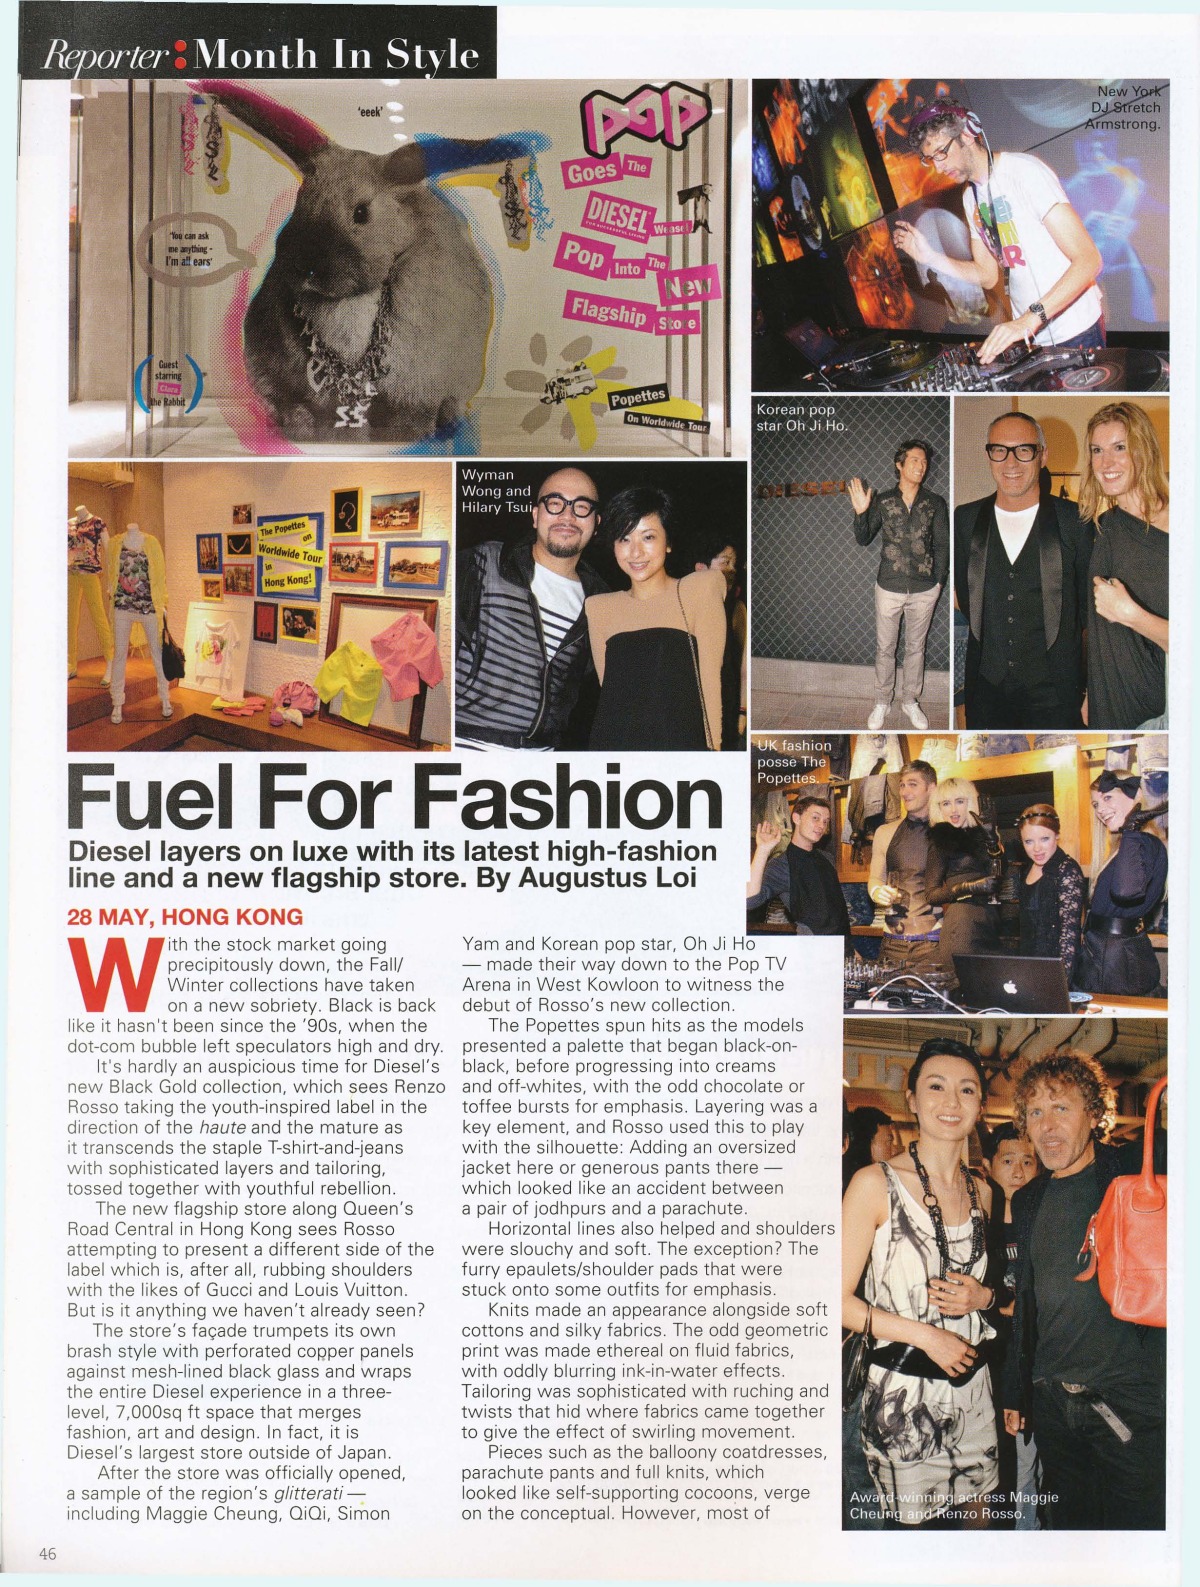 style - 2008 aug - month in style (fuel for fashion)_page_1.jpg